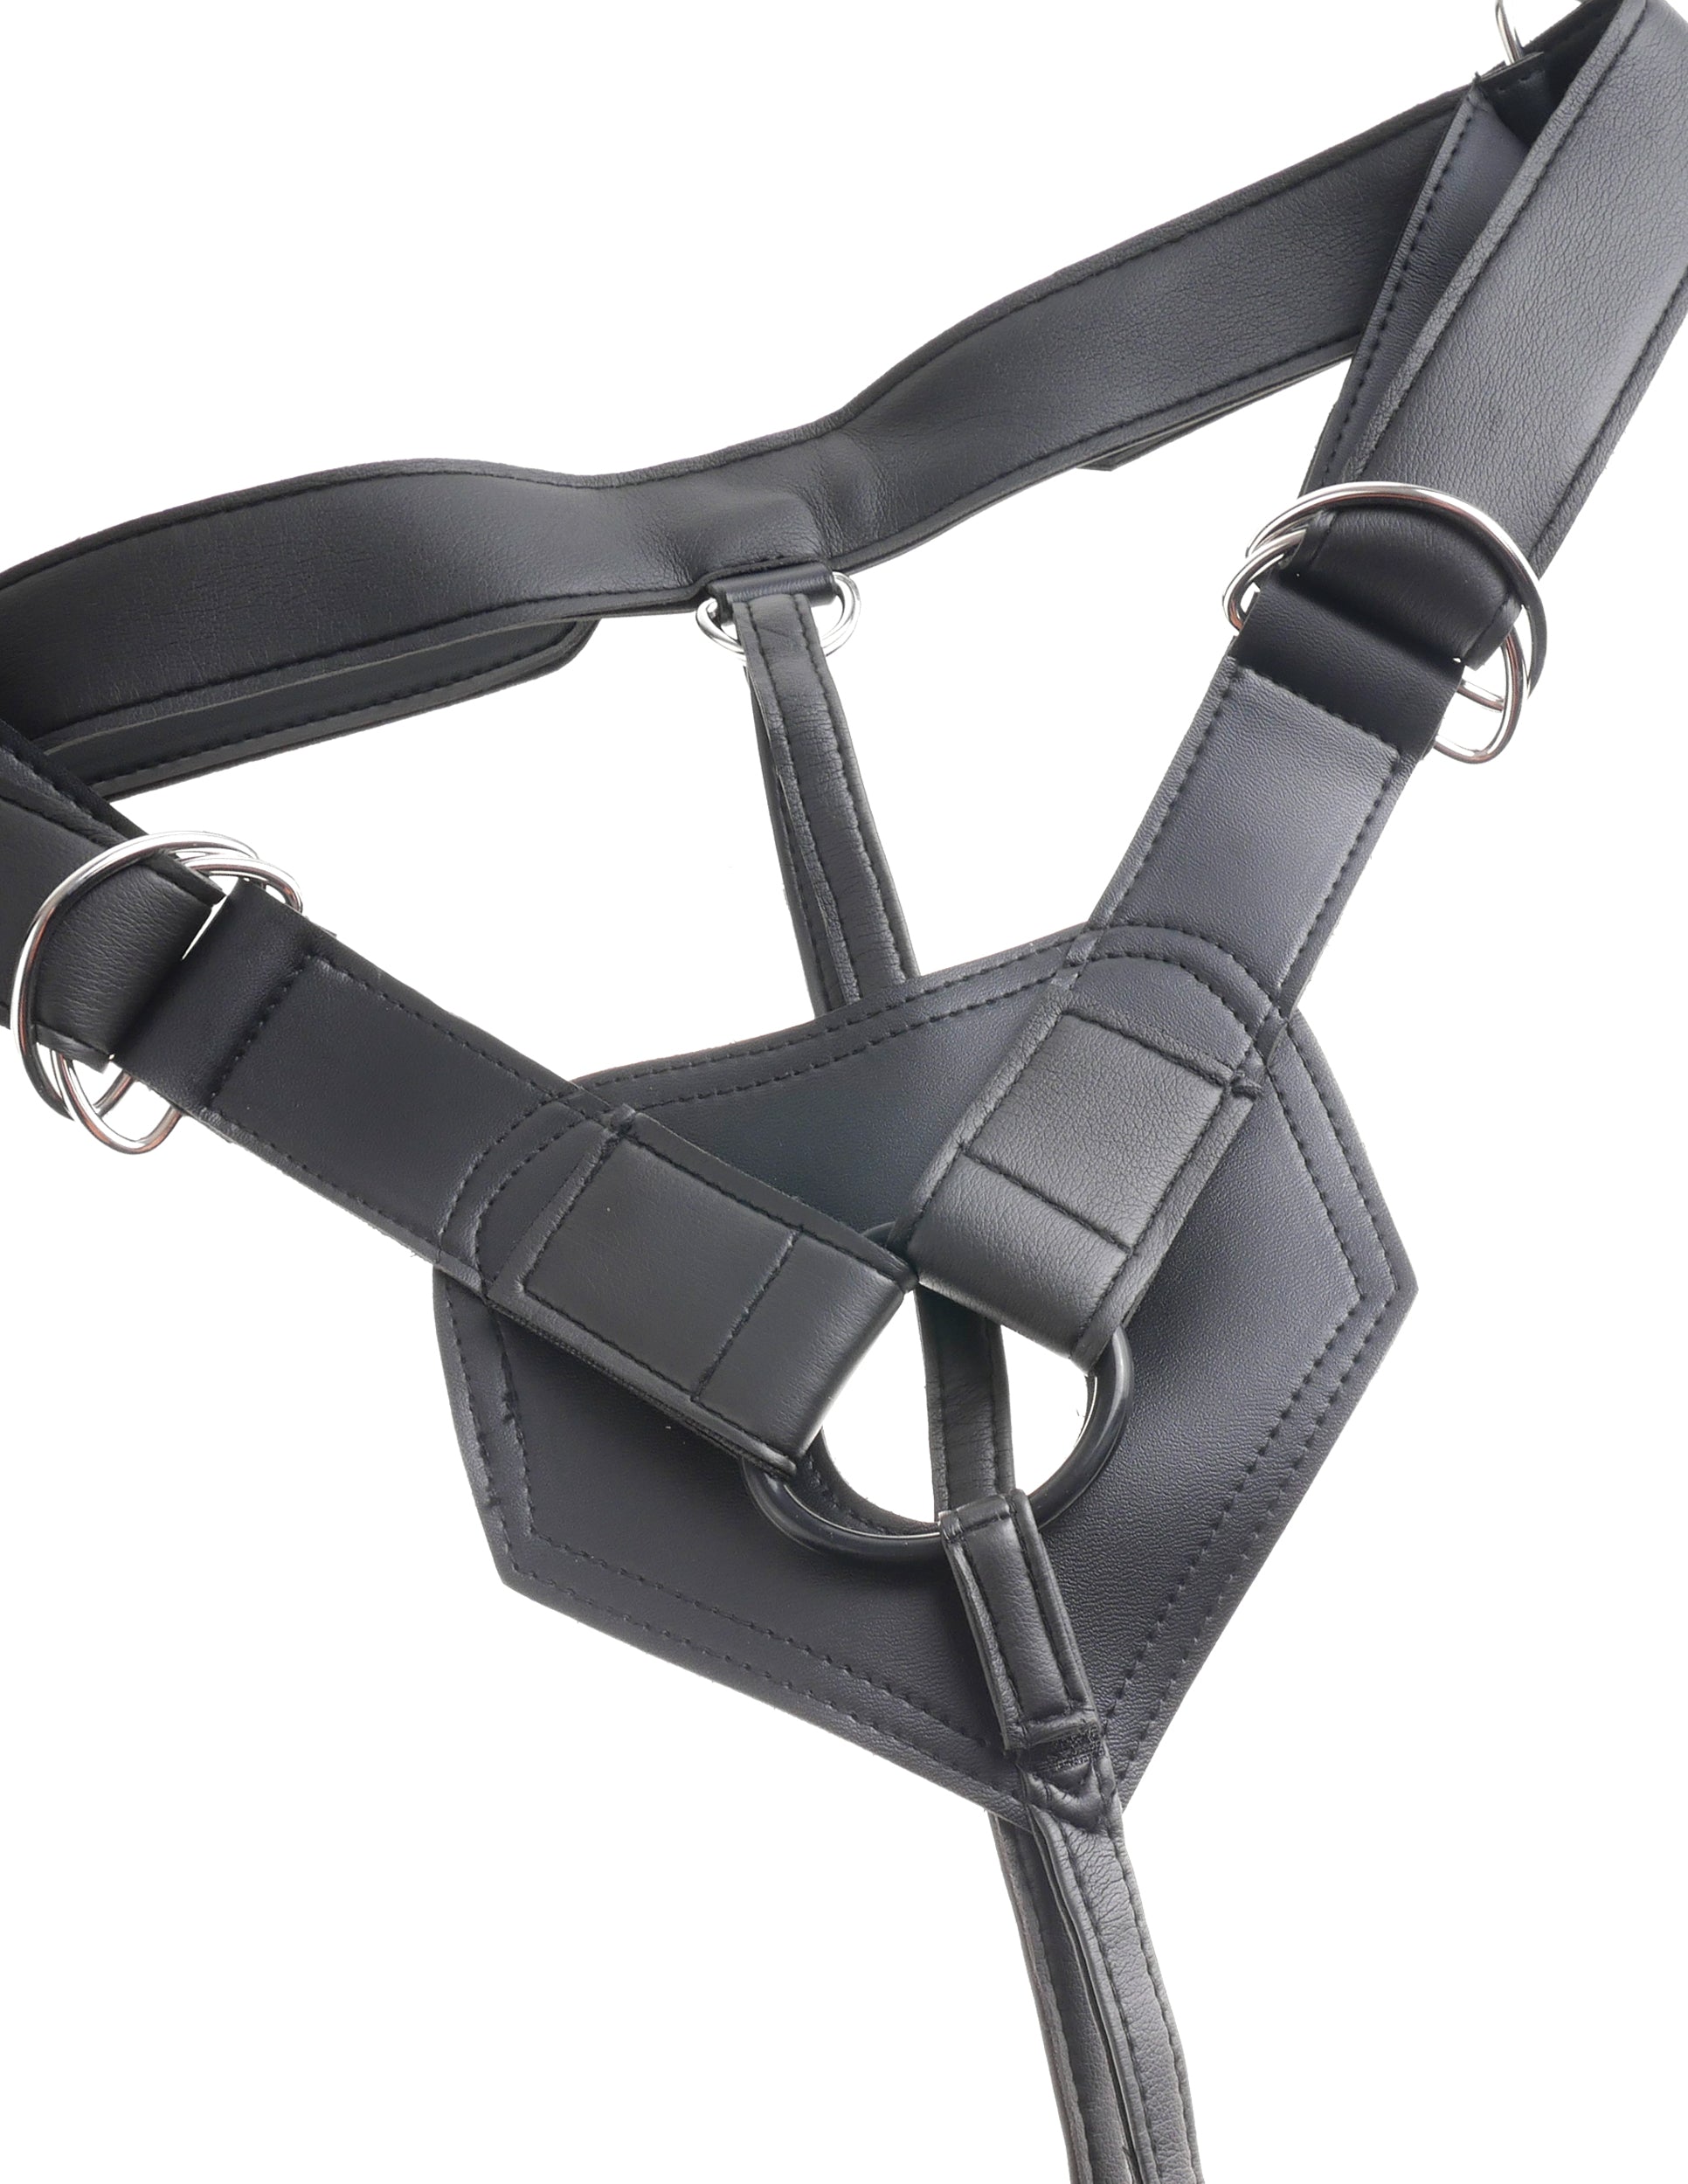 King Cock Strap On Harness W- 7 In Cock Light